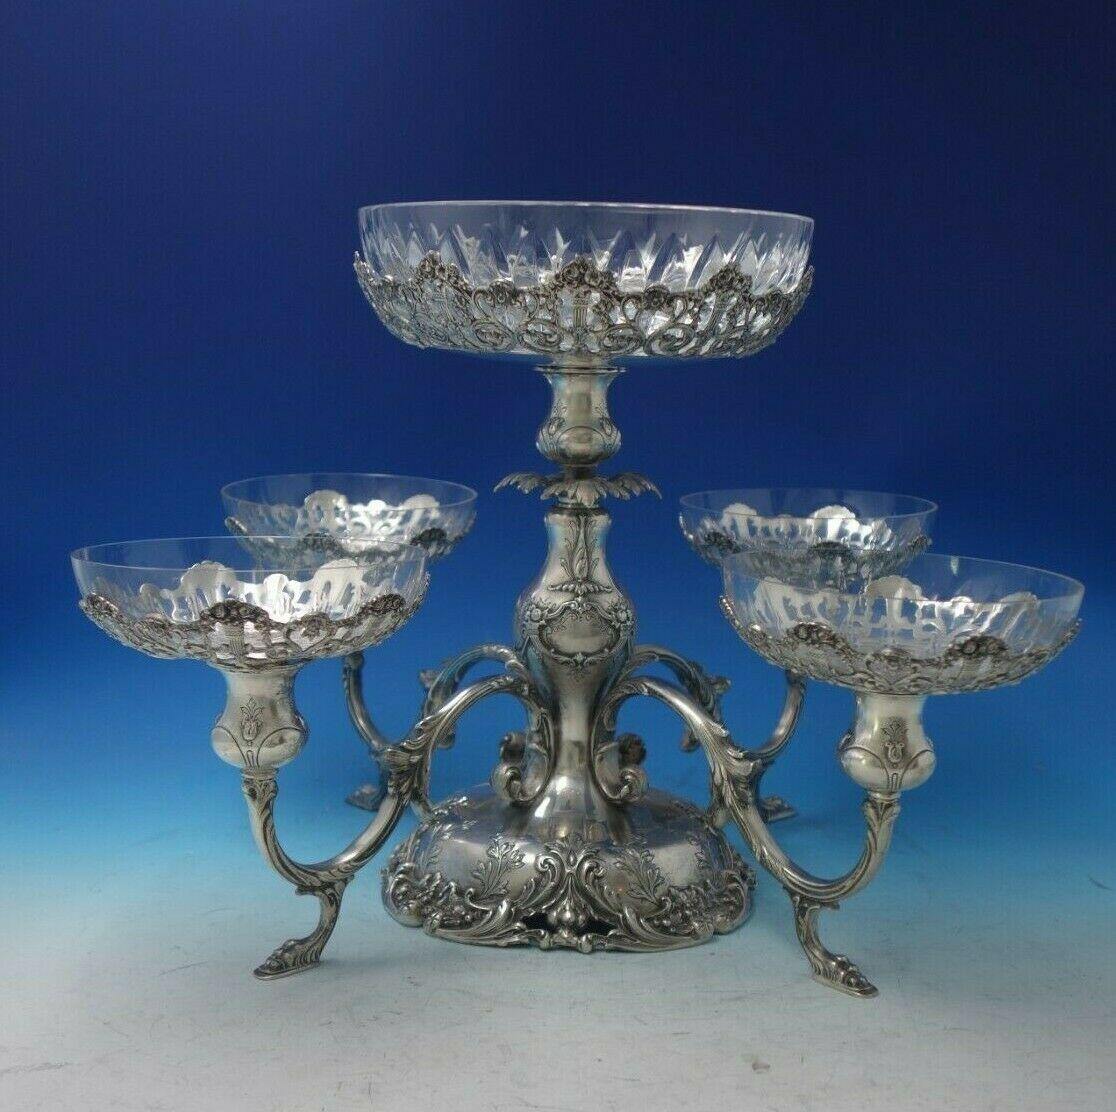 Francis I by Reed and Barton

Extraordinary exceedingly rare Francis I by Reed and Barton sterling silver epergne with four 6